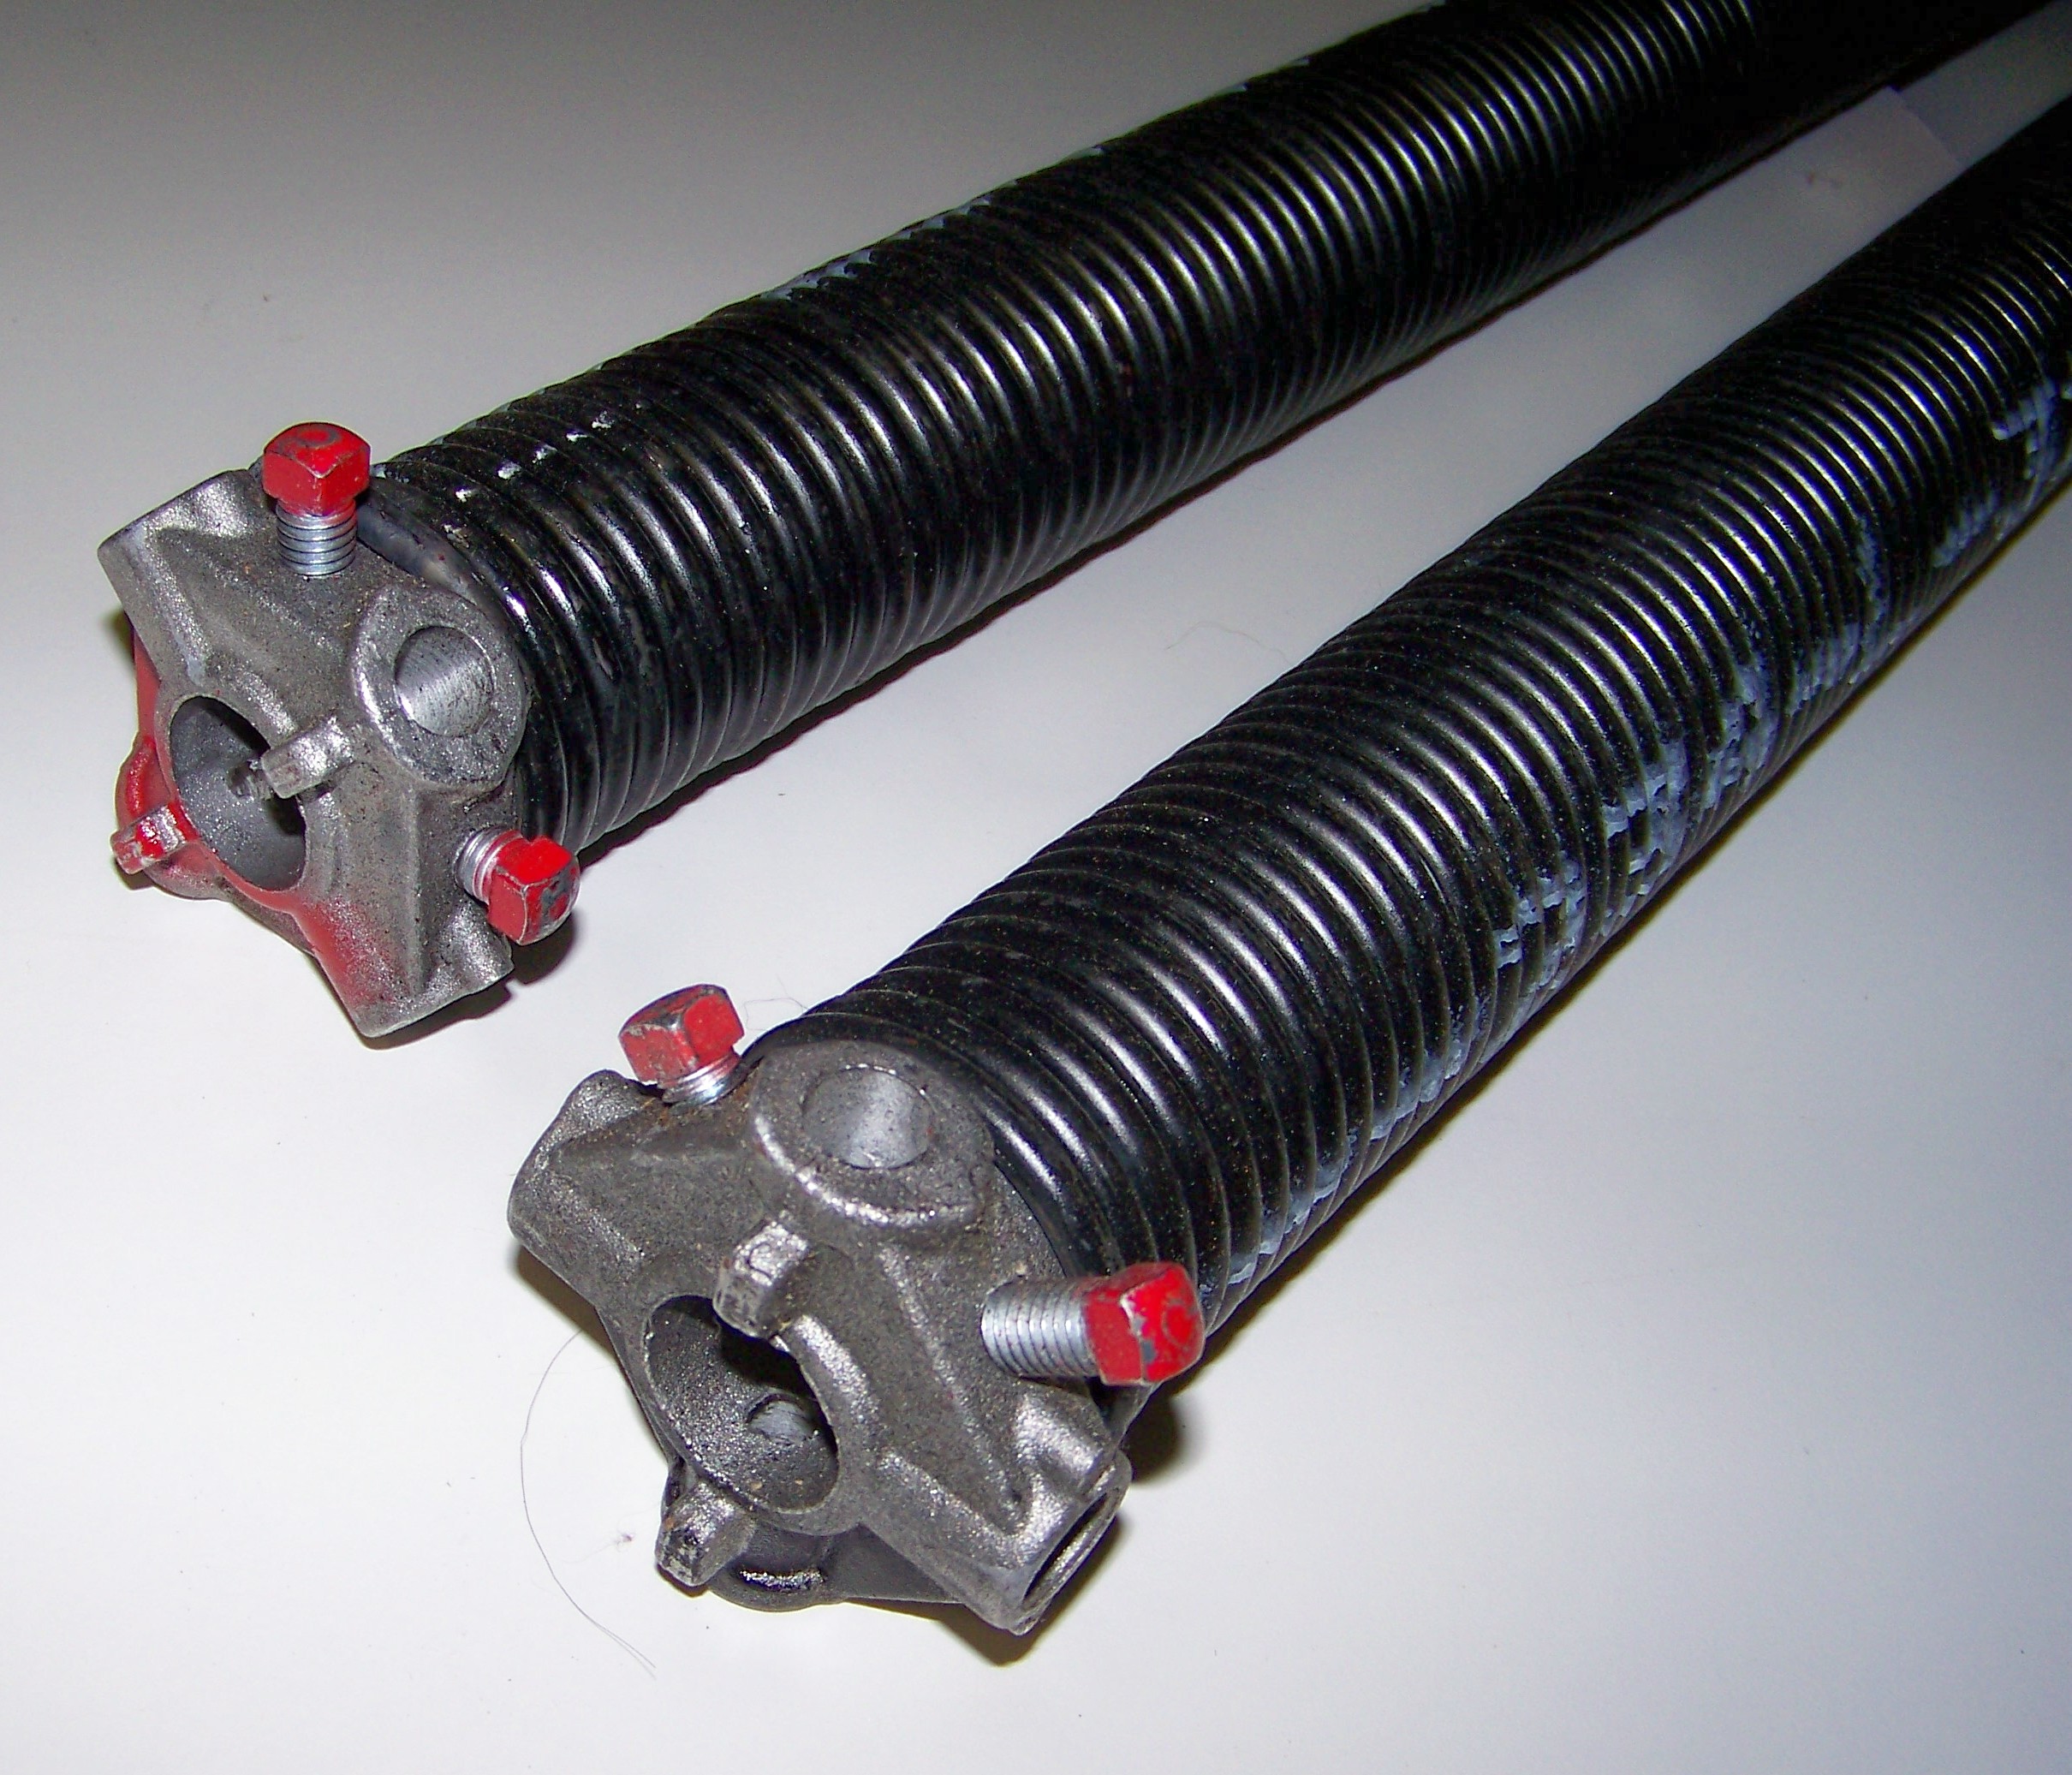 What Should You Know About Your Garage Door's Torsion Springs?